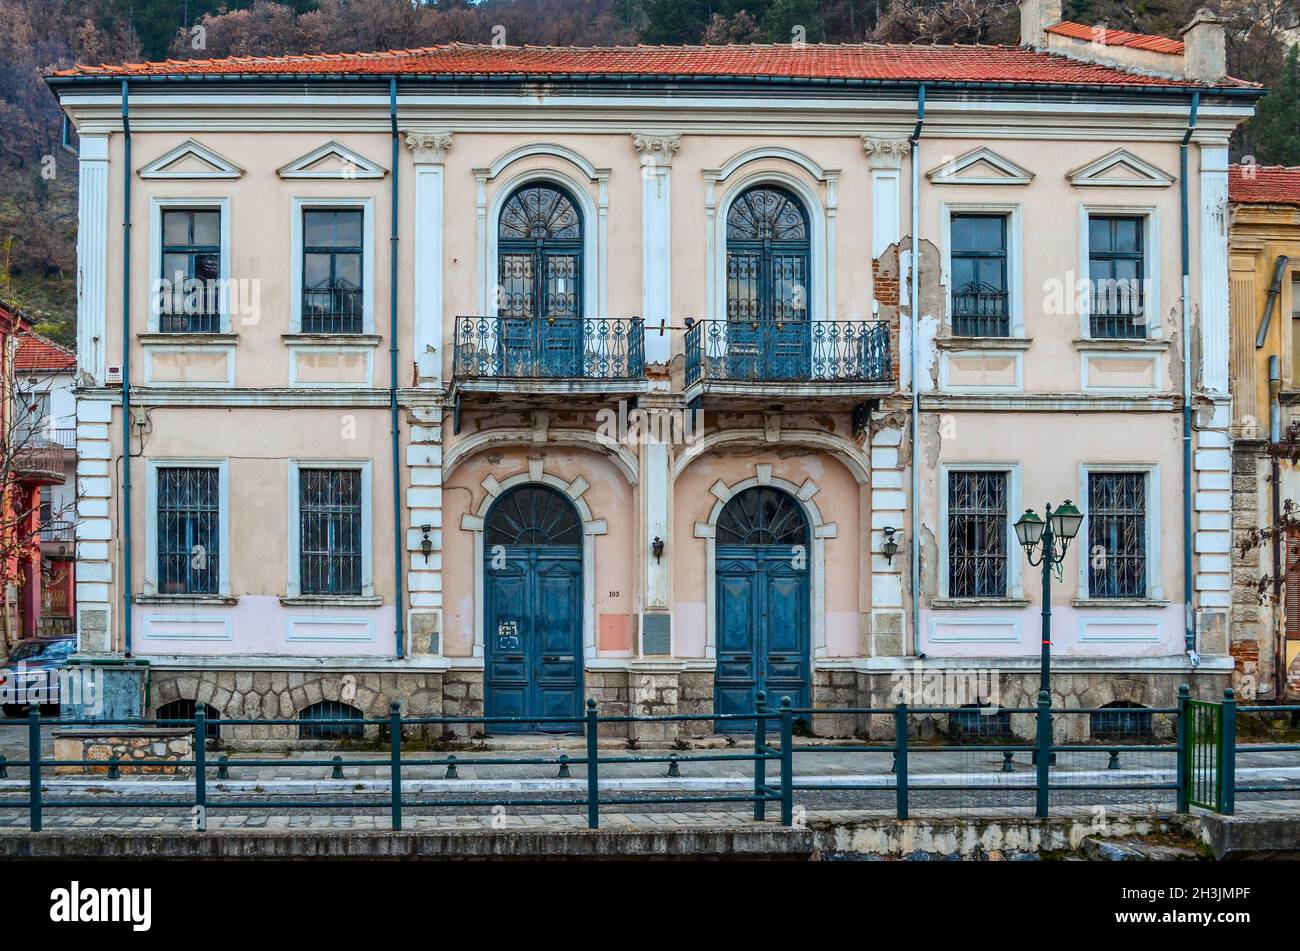 Magnificent old neoclassical buildings by the river Sakouleva in Florina. Stock Photo